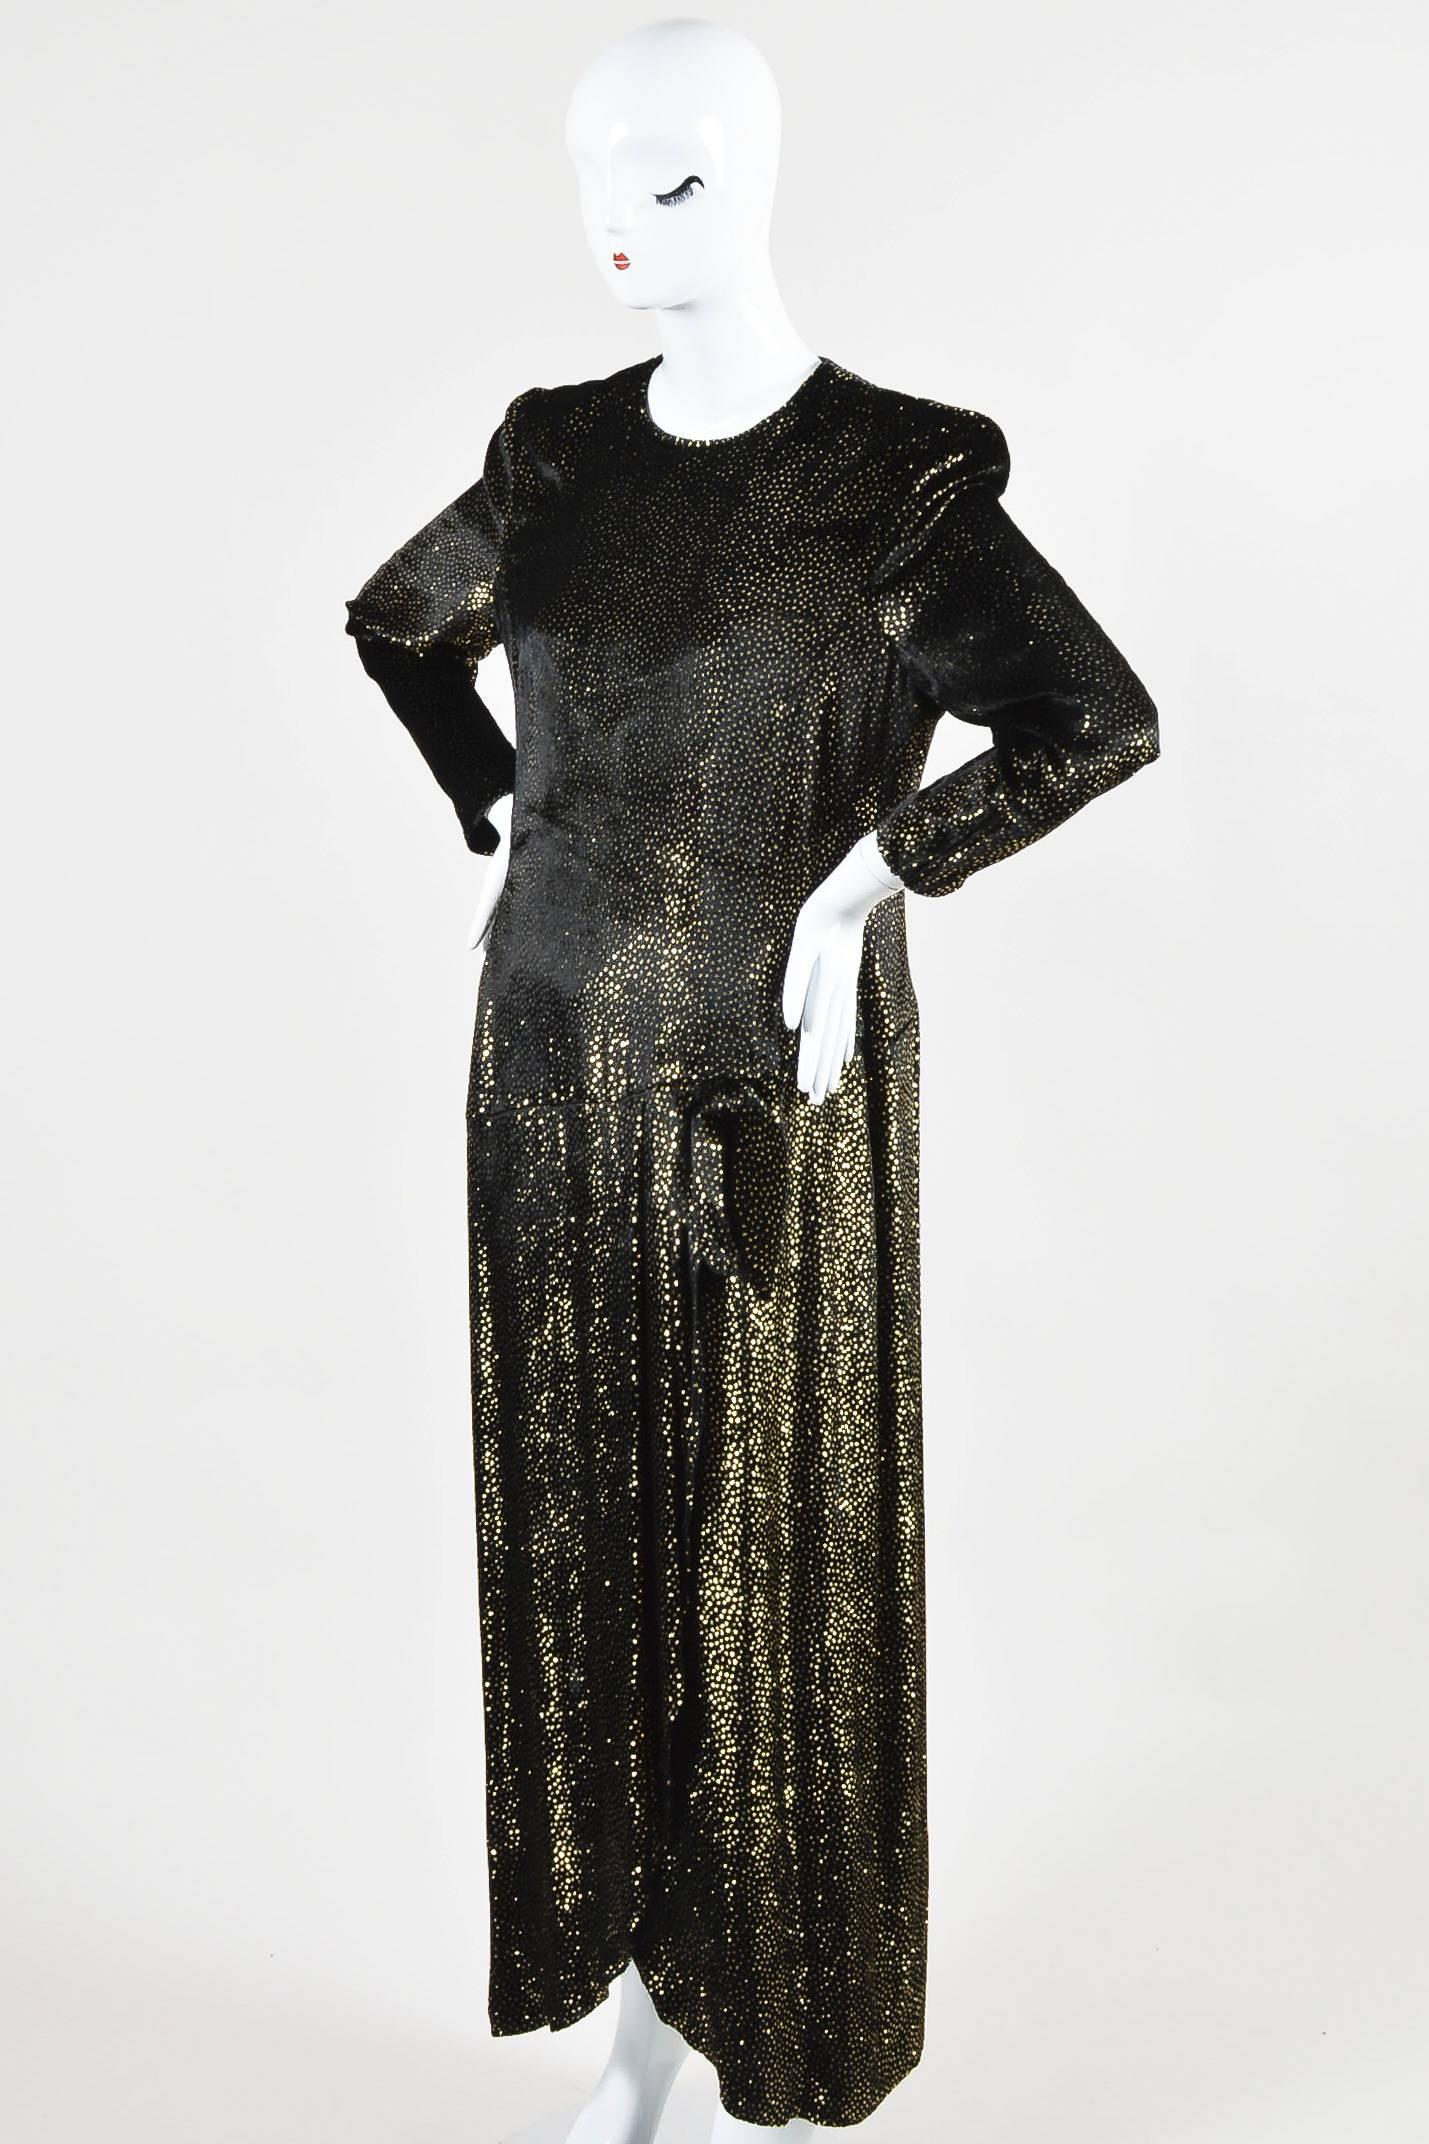 Vintage Escada dress featuring soft black velvet, metallic gold clustered sparkles, long sleeves, round neckline, bow at waist, and slit at side. Shoulder padding. Partially lined. Closes in back with hidden zipper.

Size	
42 (Germany)
 12